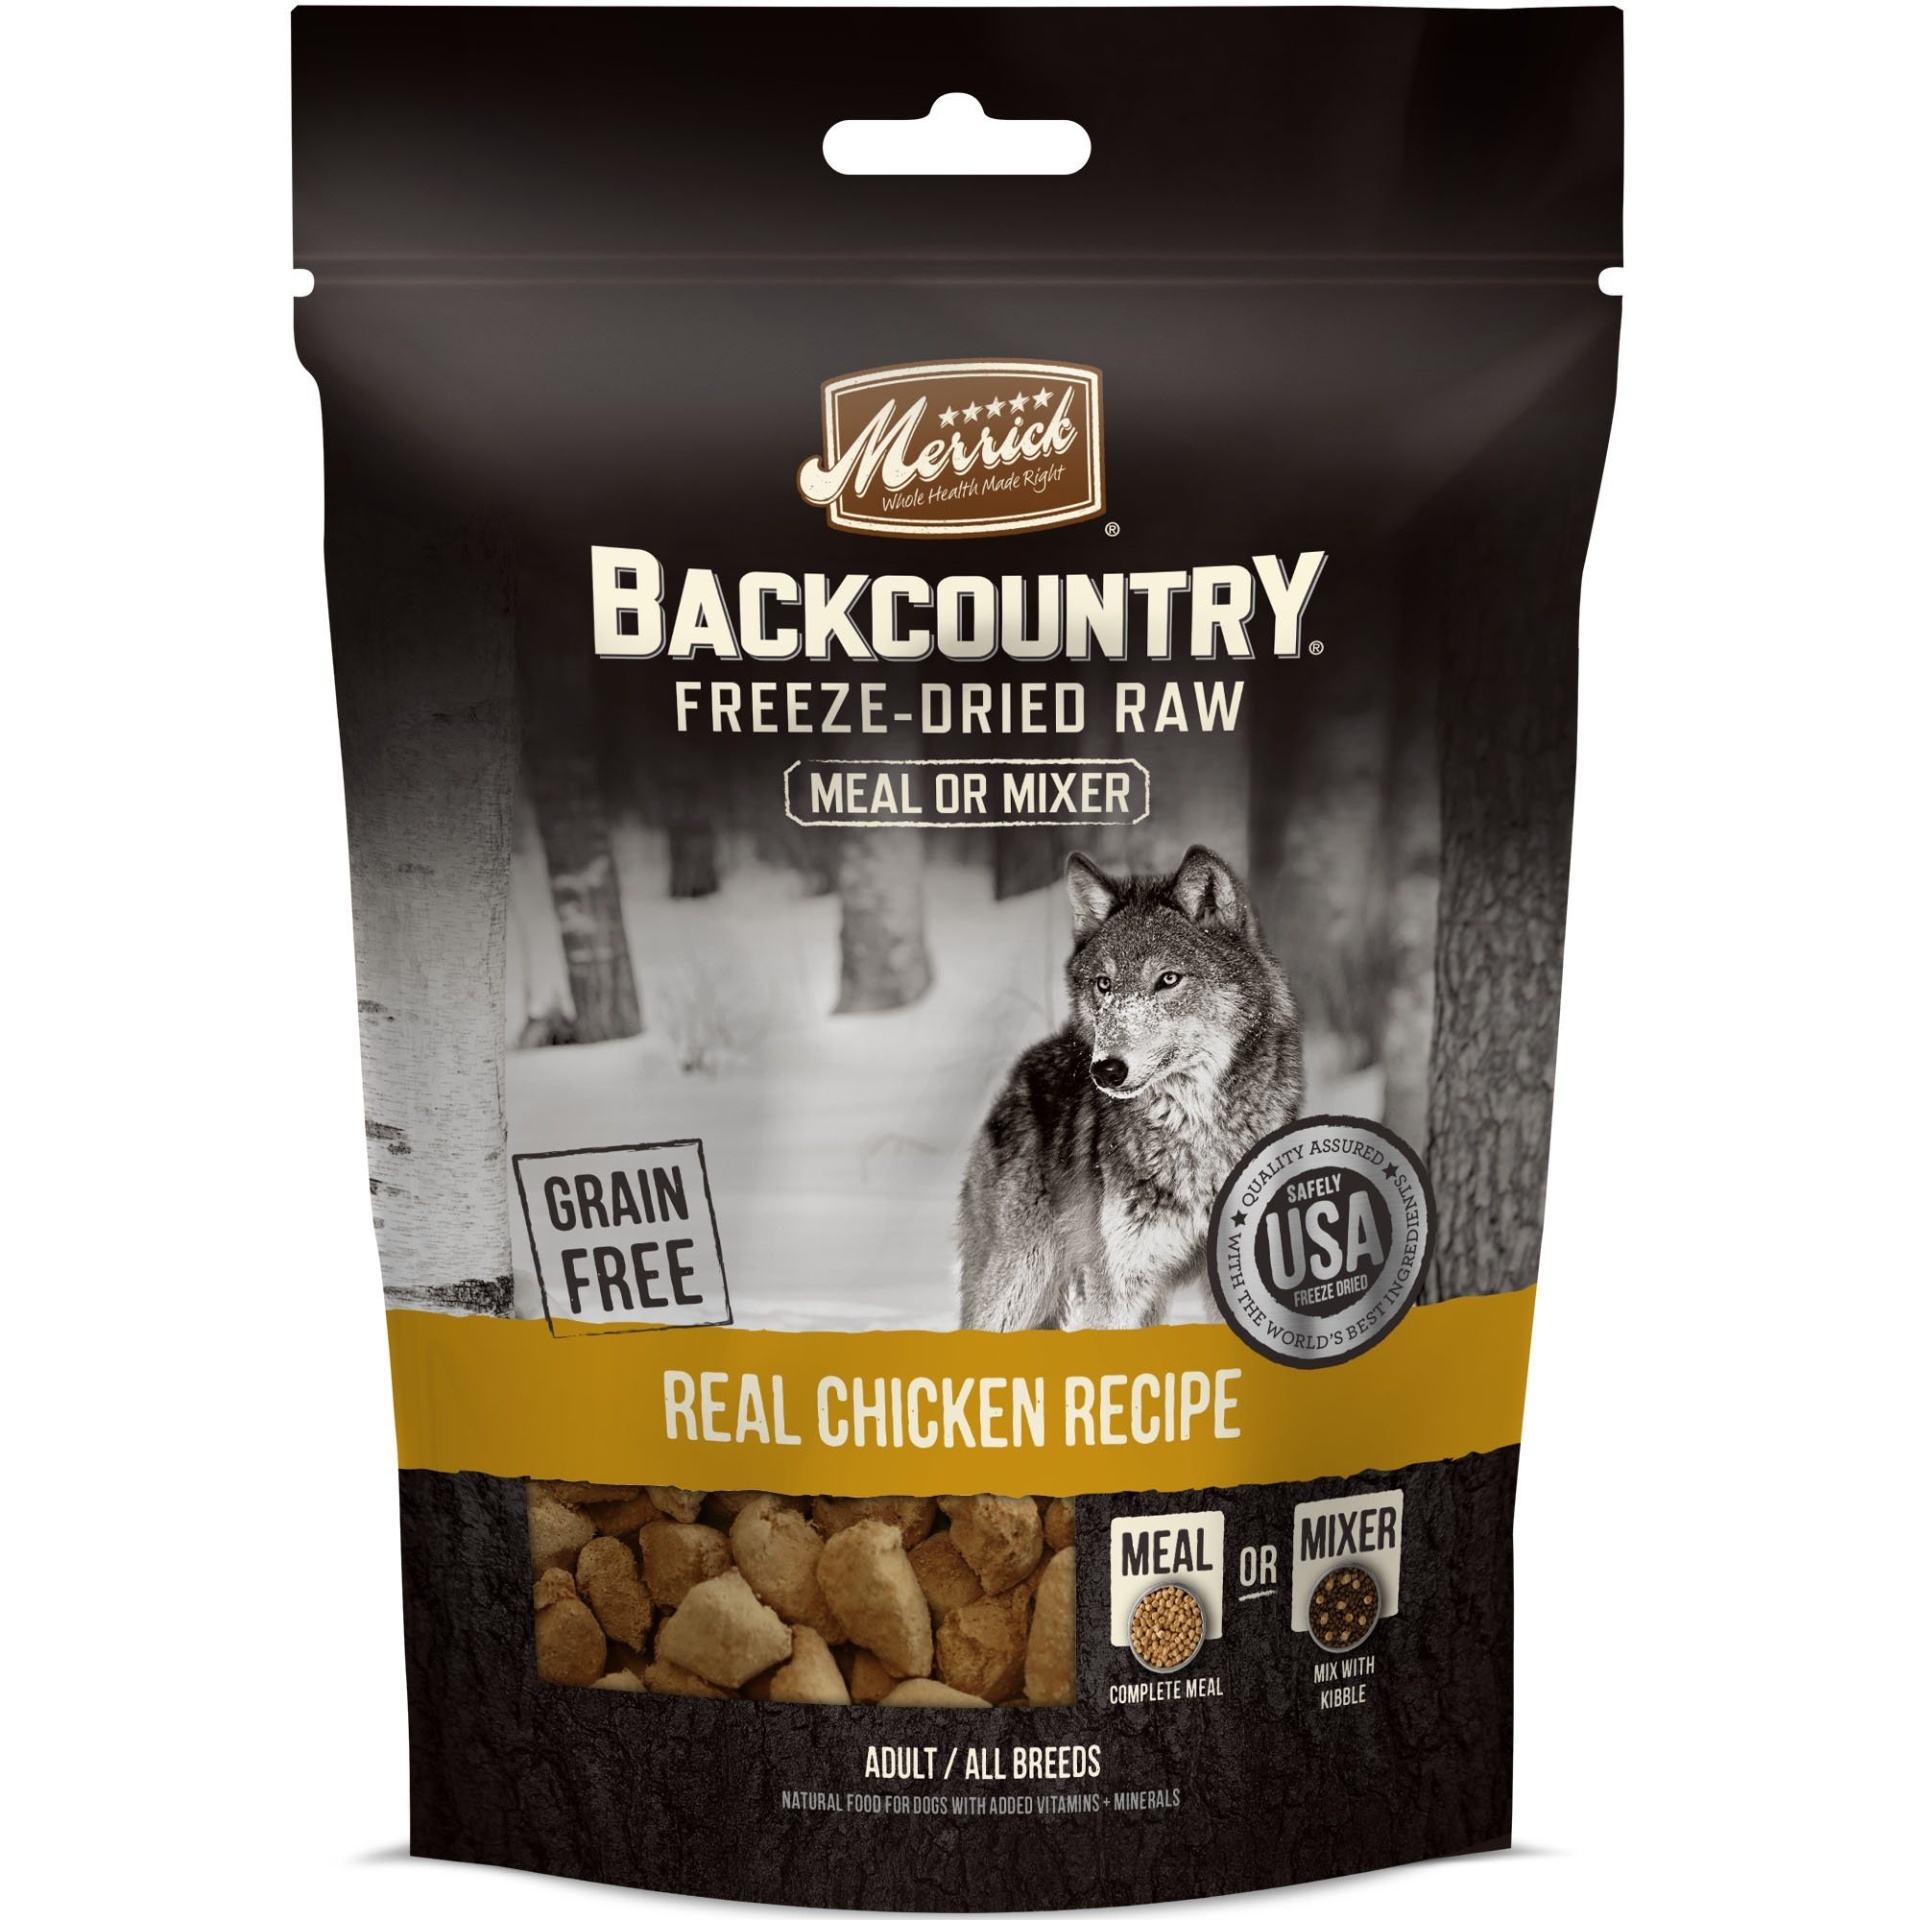 slide 1 of 1, Merrick Backcountry Freeze-Dried Raw Real Chicken Recipe Meal Or Mixer Grain Free Adult Dog Food, 5.5 oz